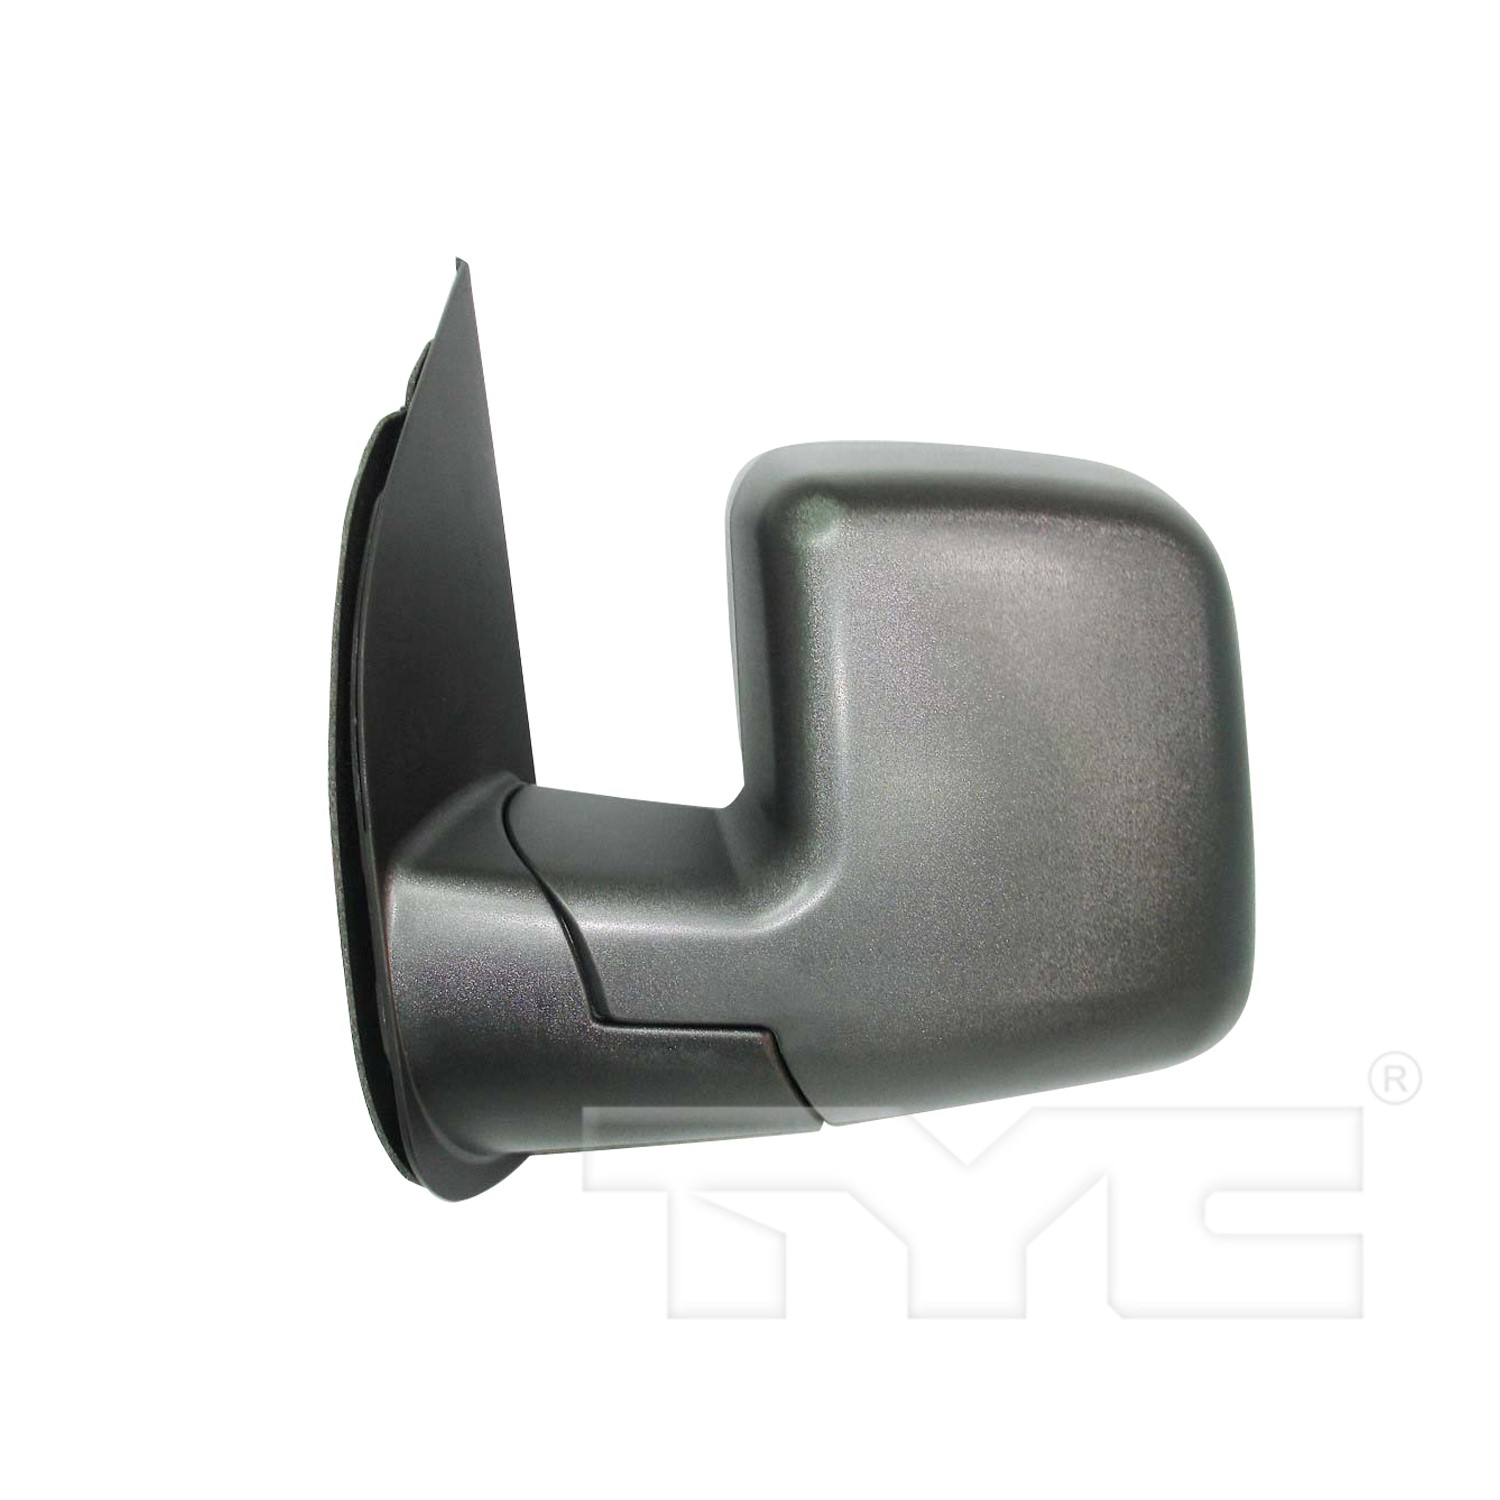 Aftermarket MIRRORS for FORD - E-350 SUPER DUTY, E-350 SUPER DUTY,02-07,LT Mirror outside rear view